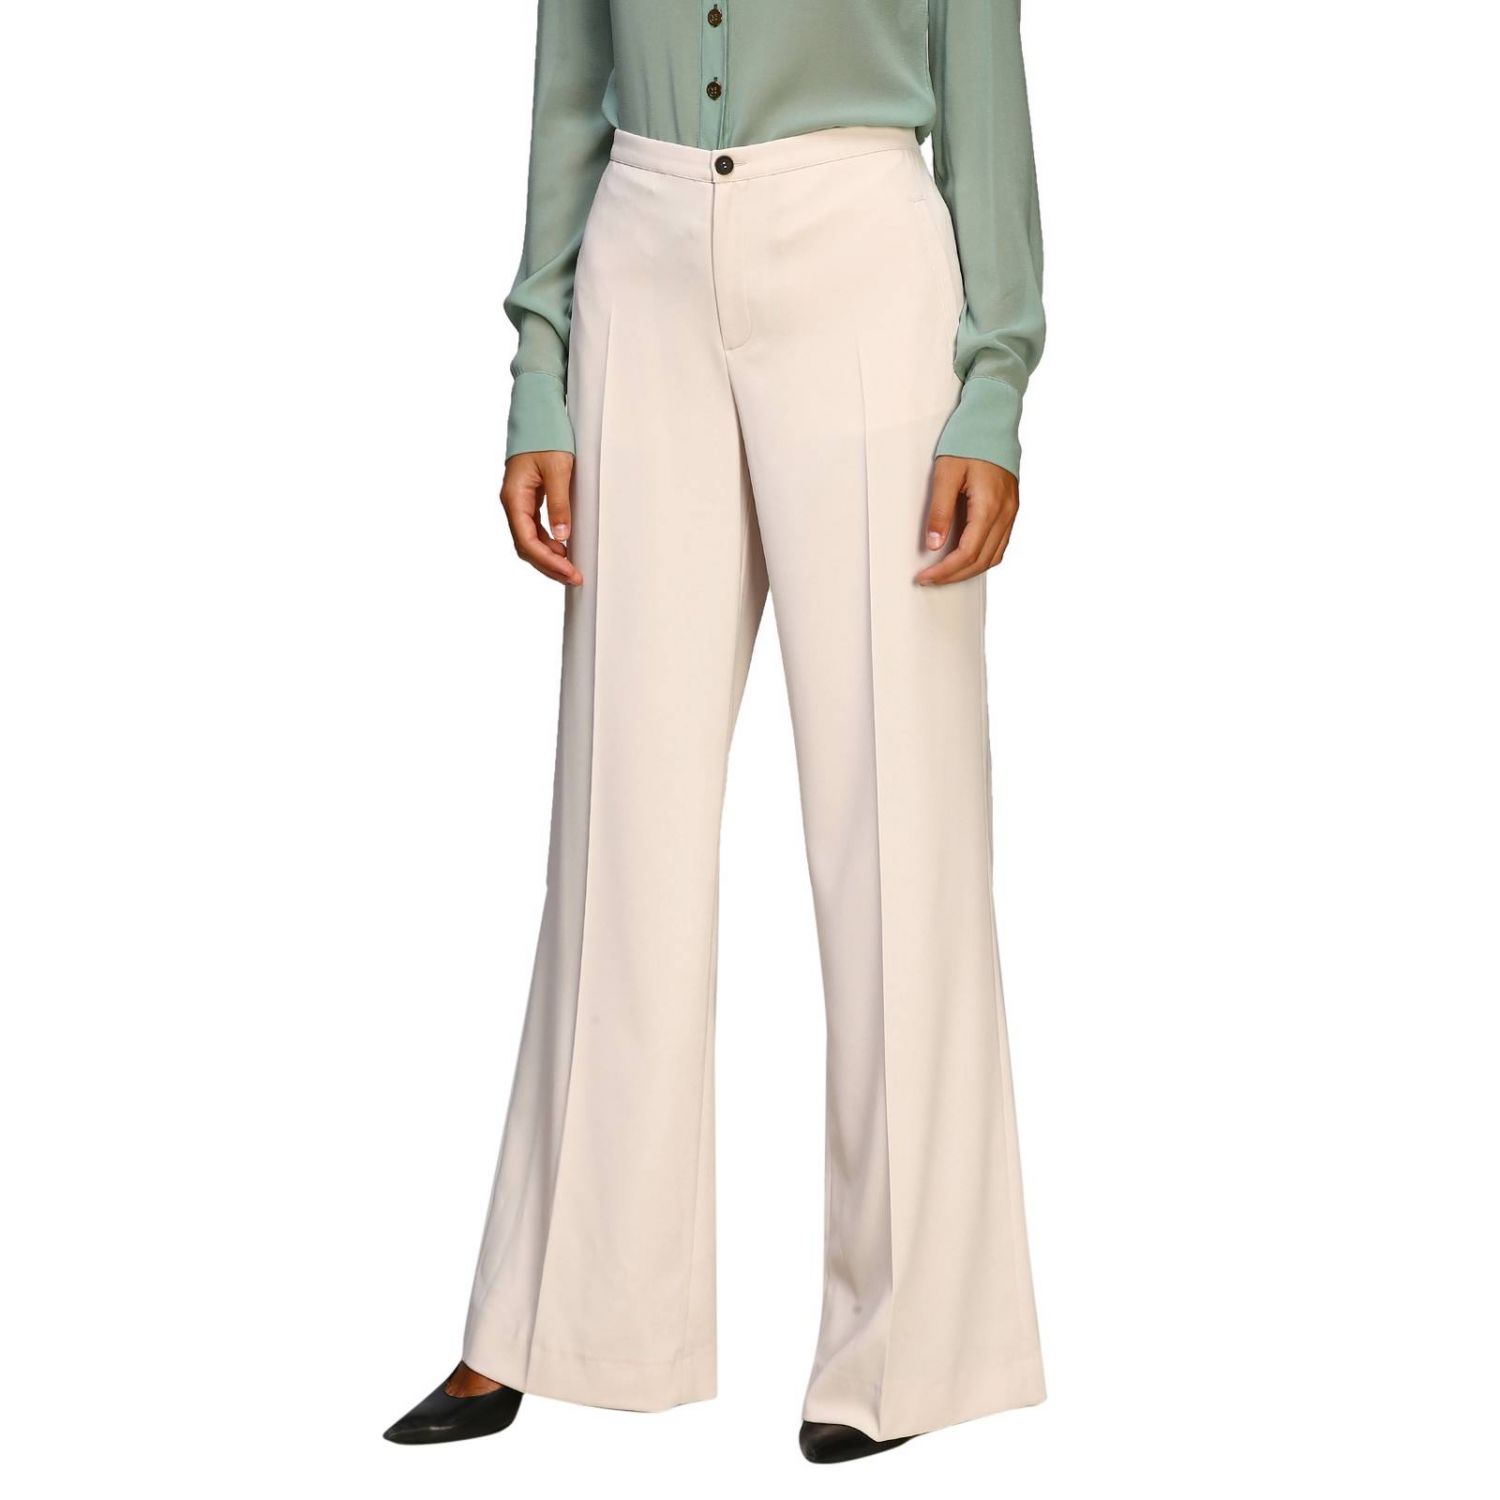 Alysi Outlet: pants for woman - Yellow Cream | Alysi pants 159130A9051 ...